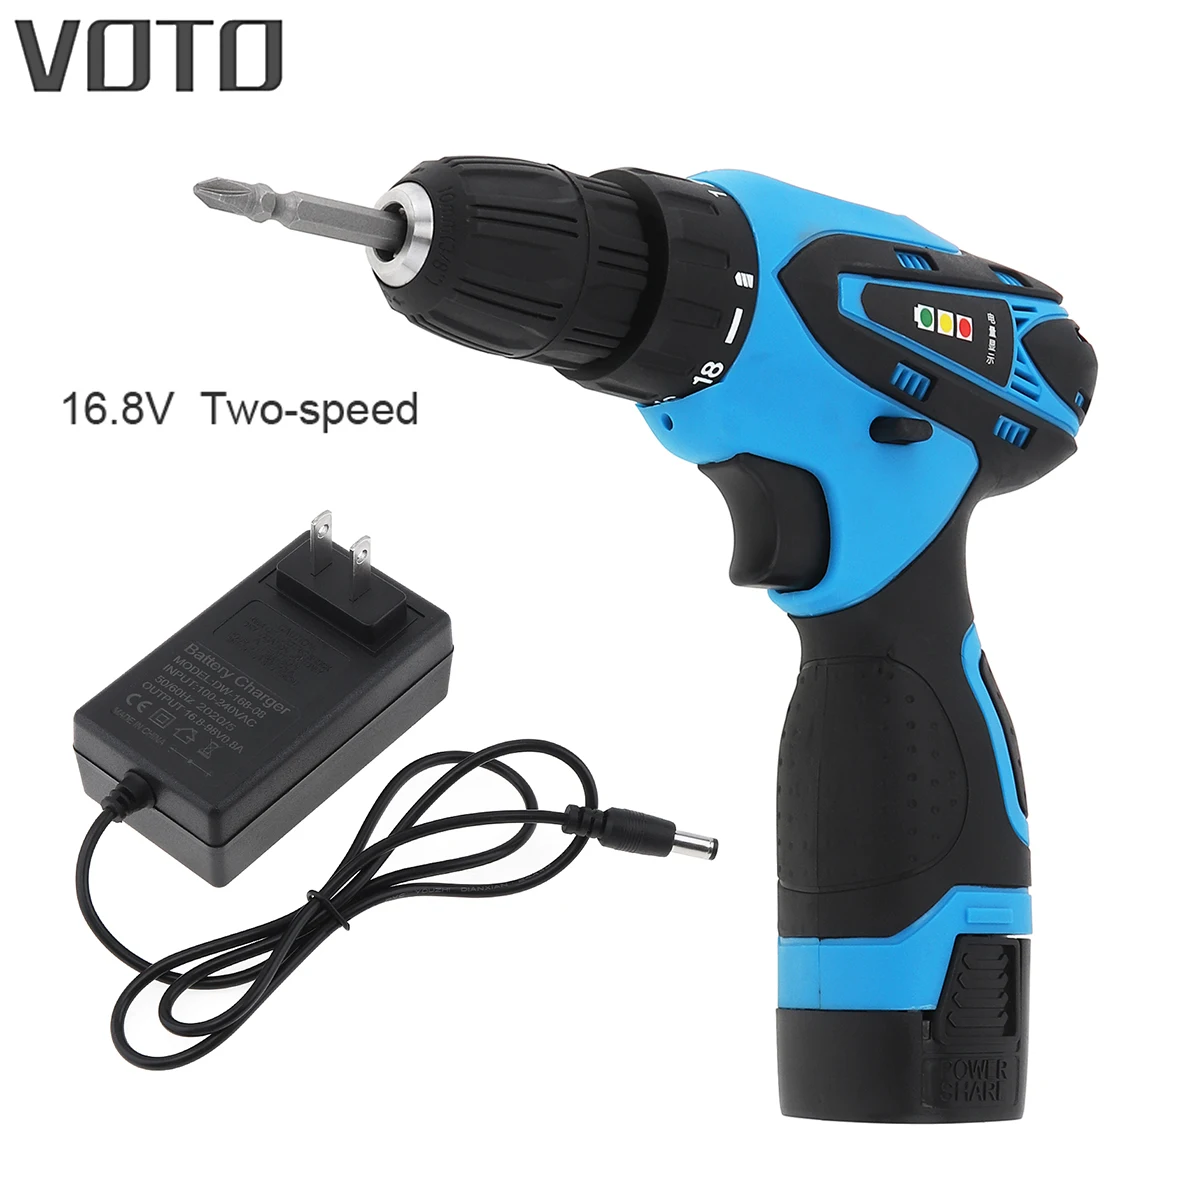 AC100-240V Cordless 16.8V Electric Screwdriver with Li-ion Battery and Two-speed Adjustment Button for Handling Screws Punching